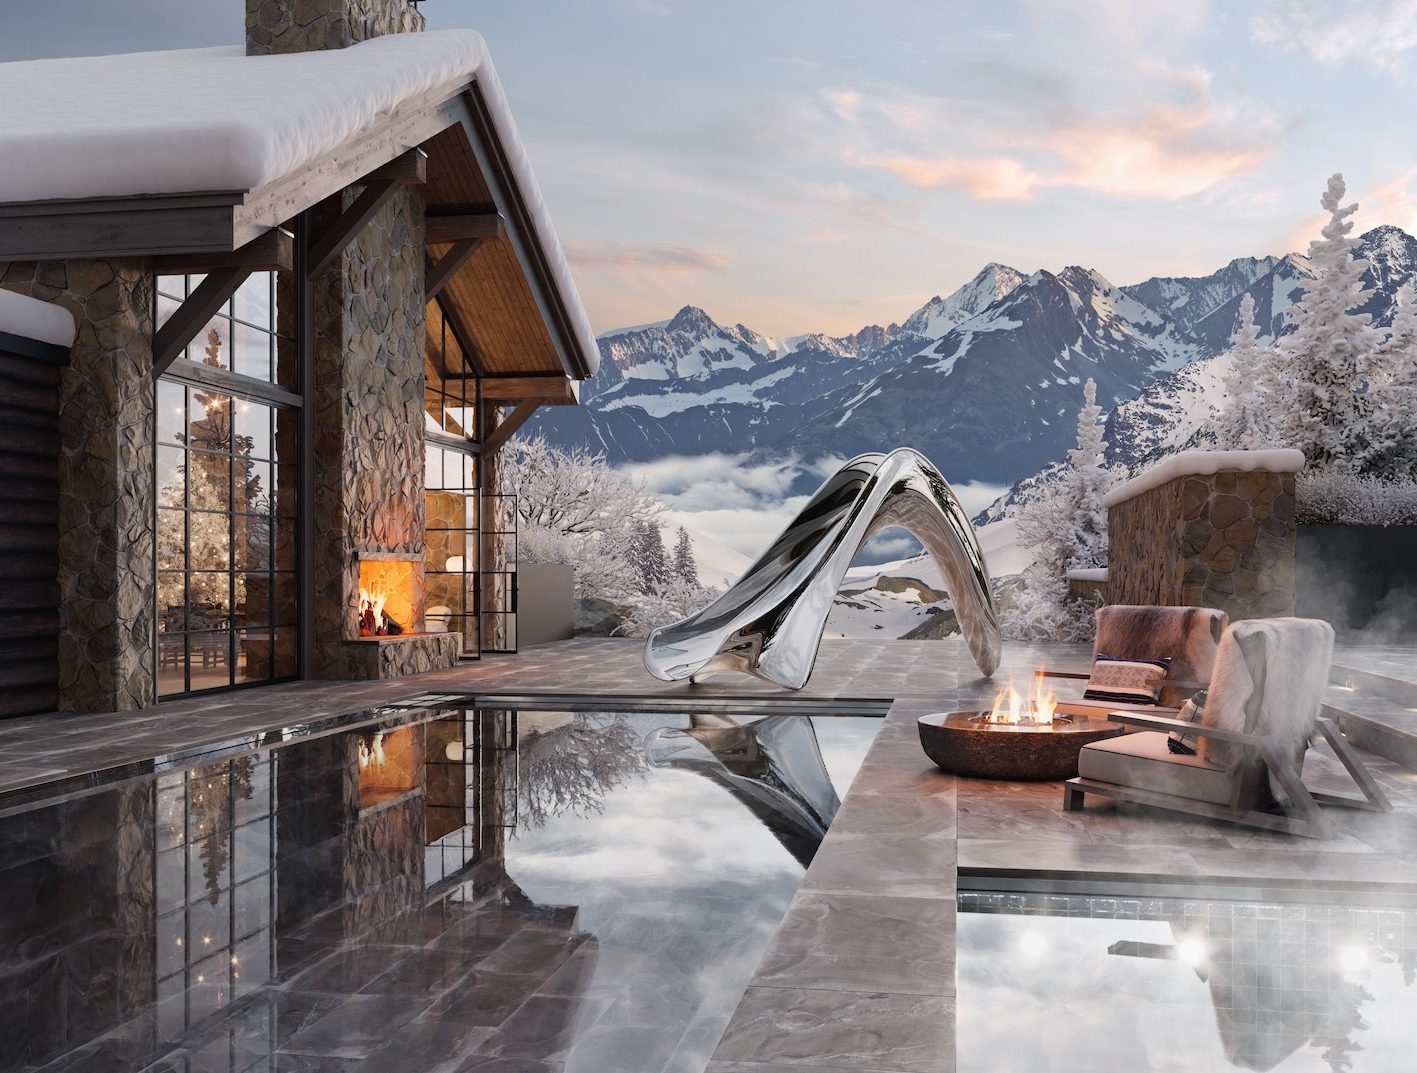 Stainless steel water slide with a snowy mountain backdrop, next to the fire and lodge